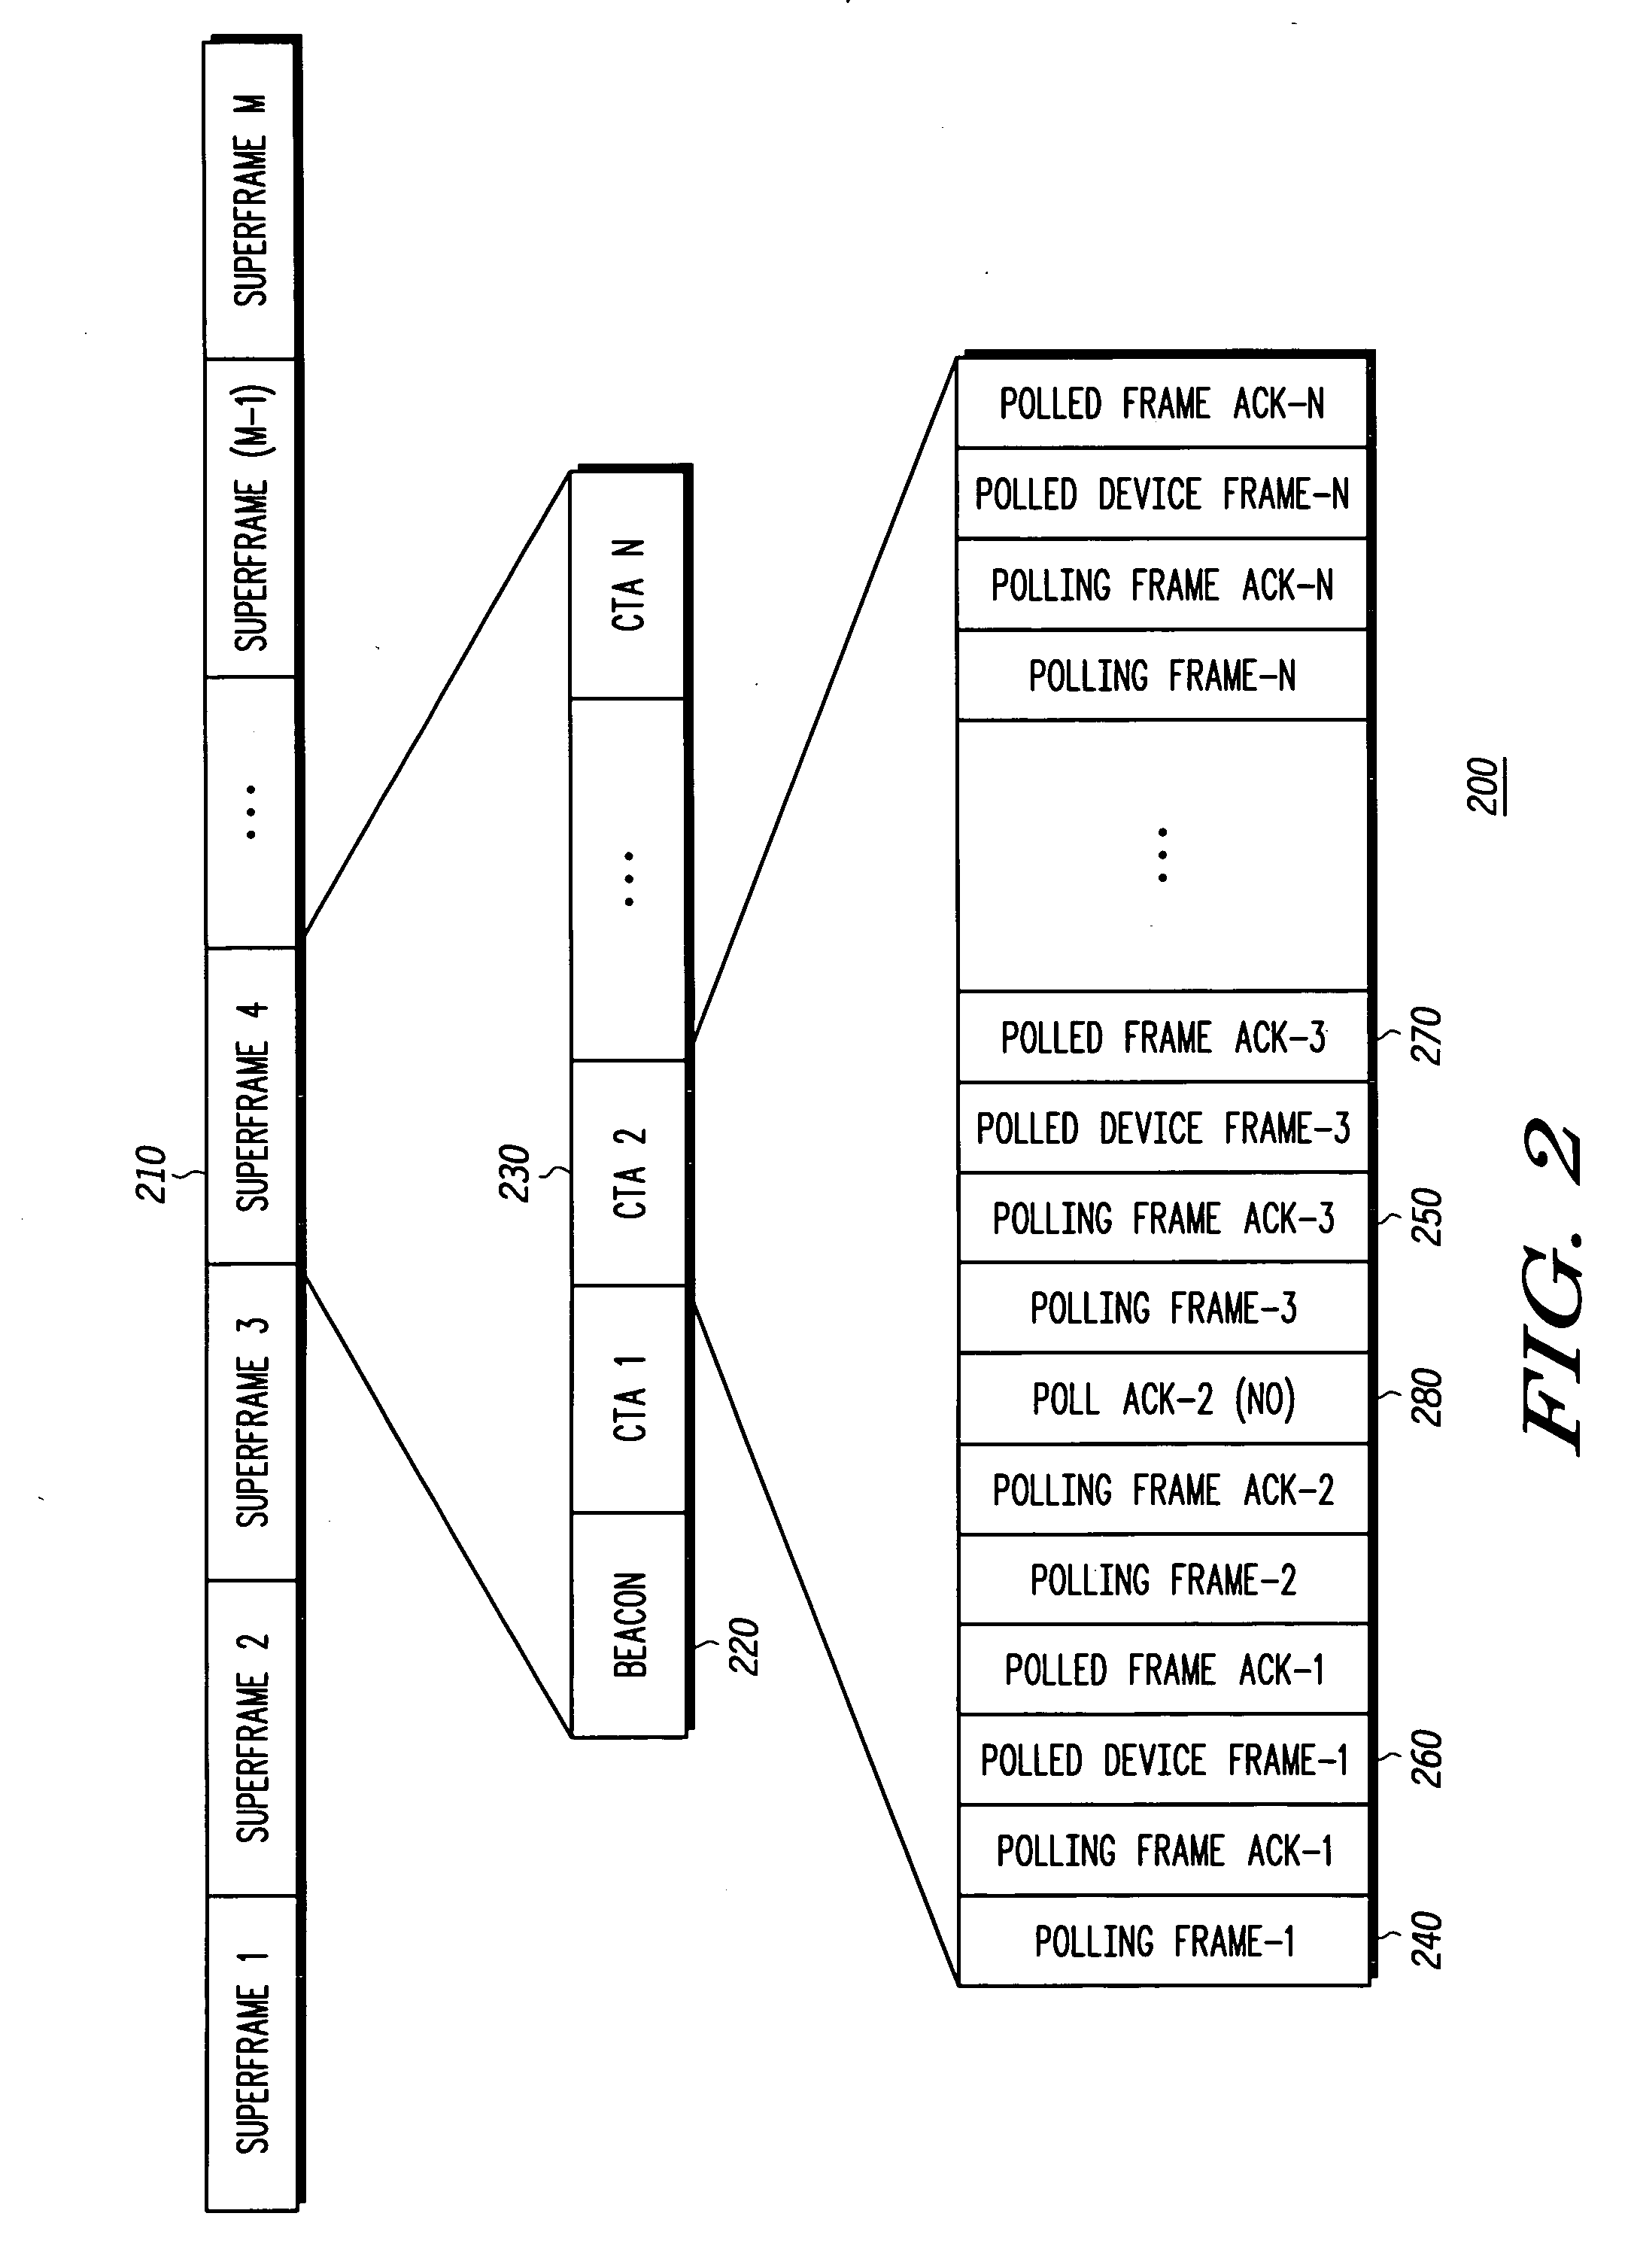 Method for polling in a medium access control protocol